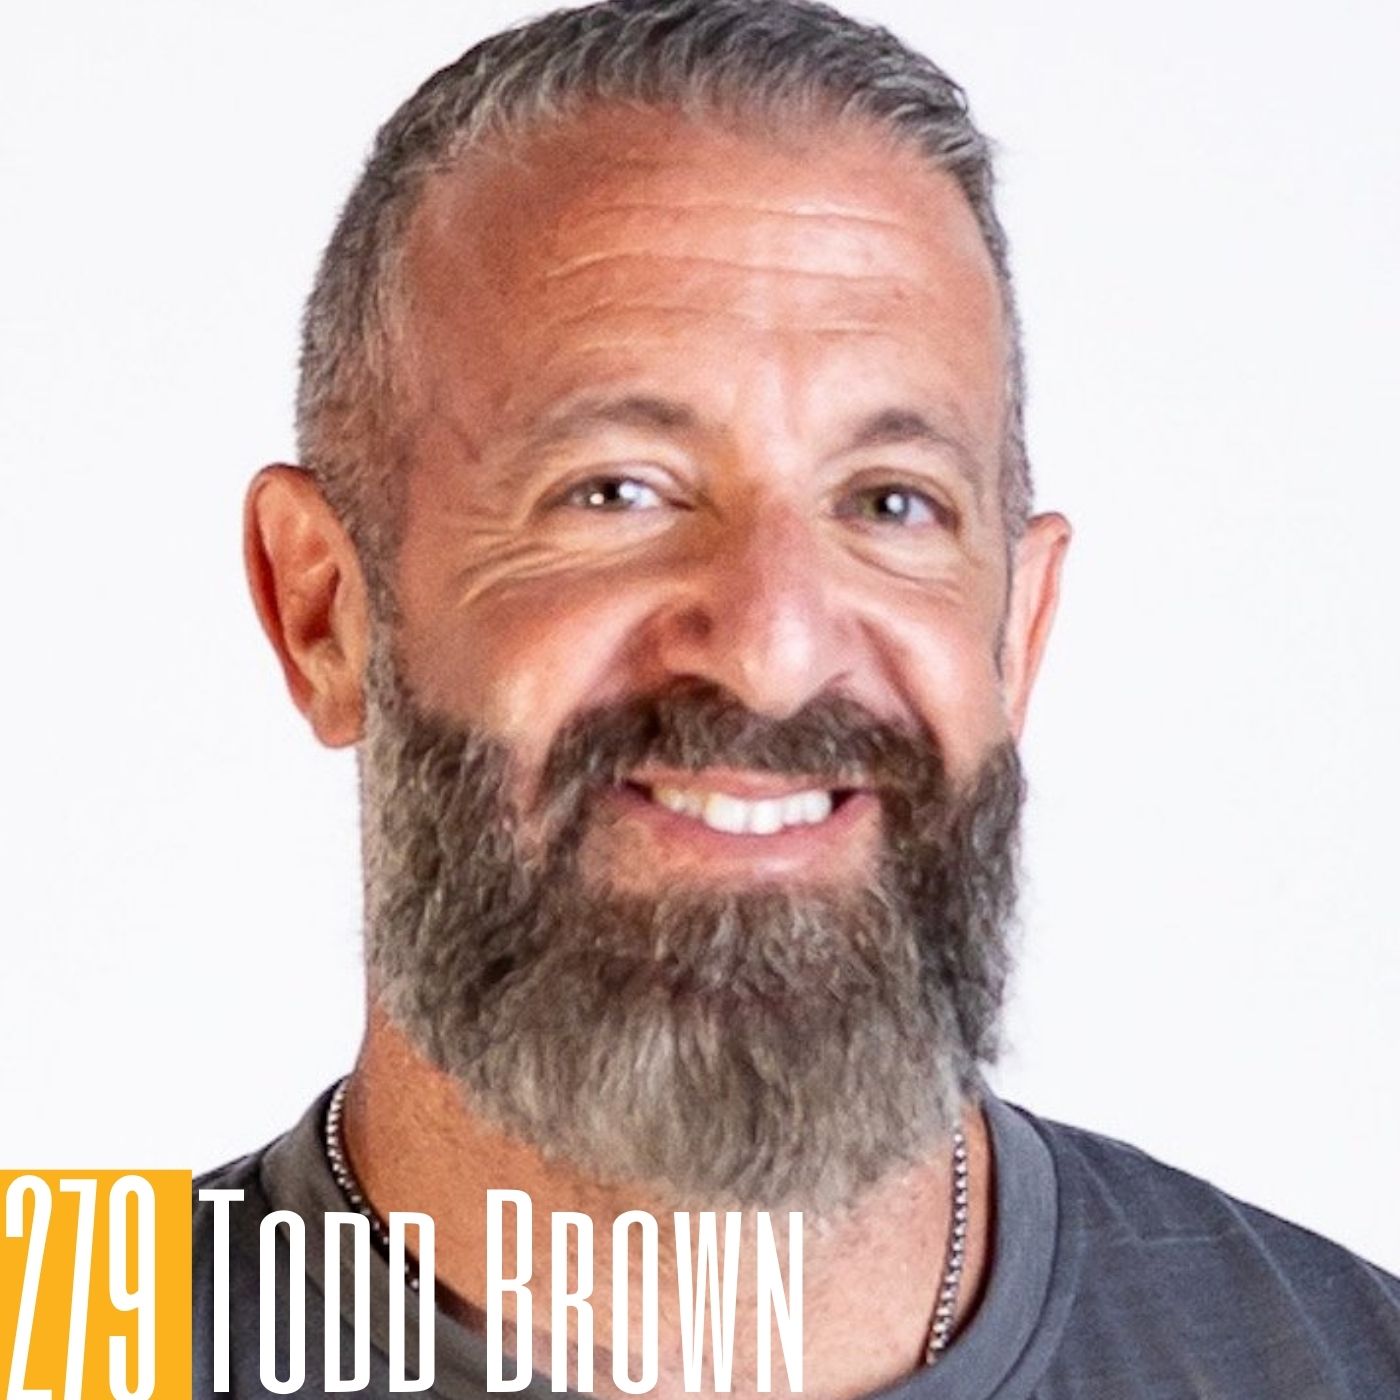 279 Todd Brown - Different Gets Attention